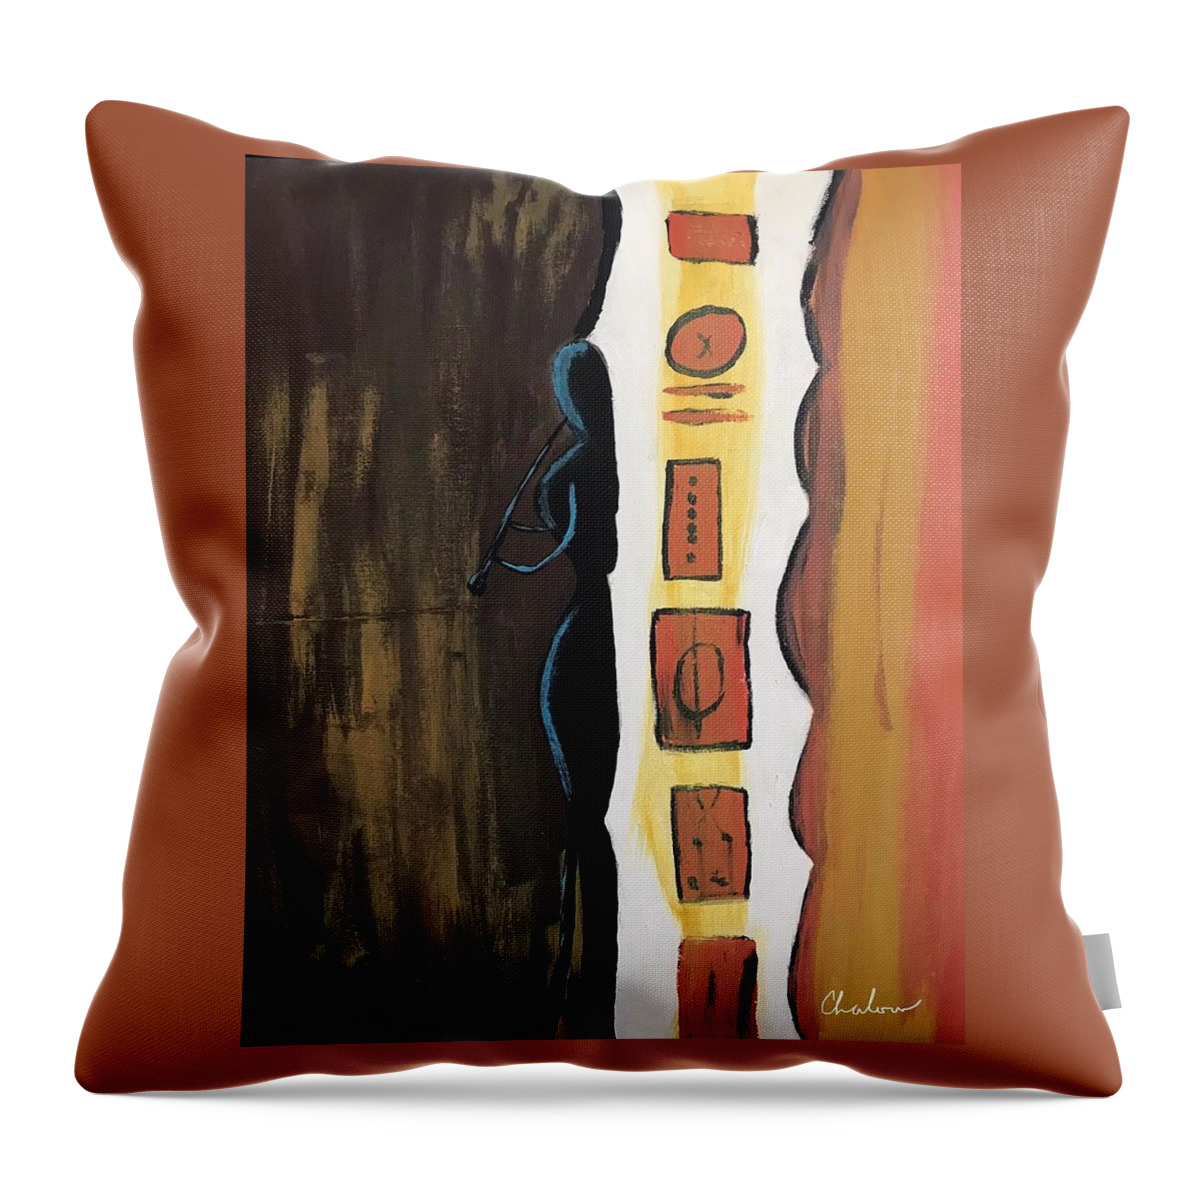  Throw Pillow featuring the painting Let's Jazz by Charles Young